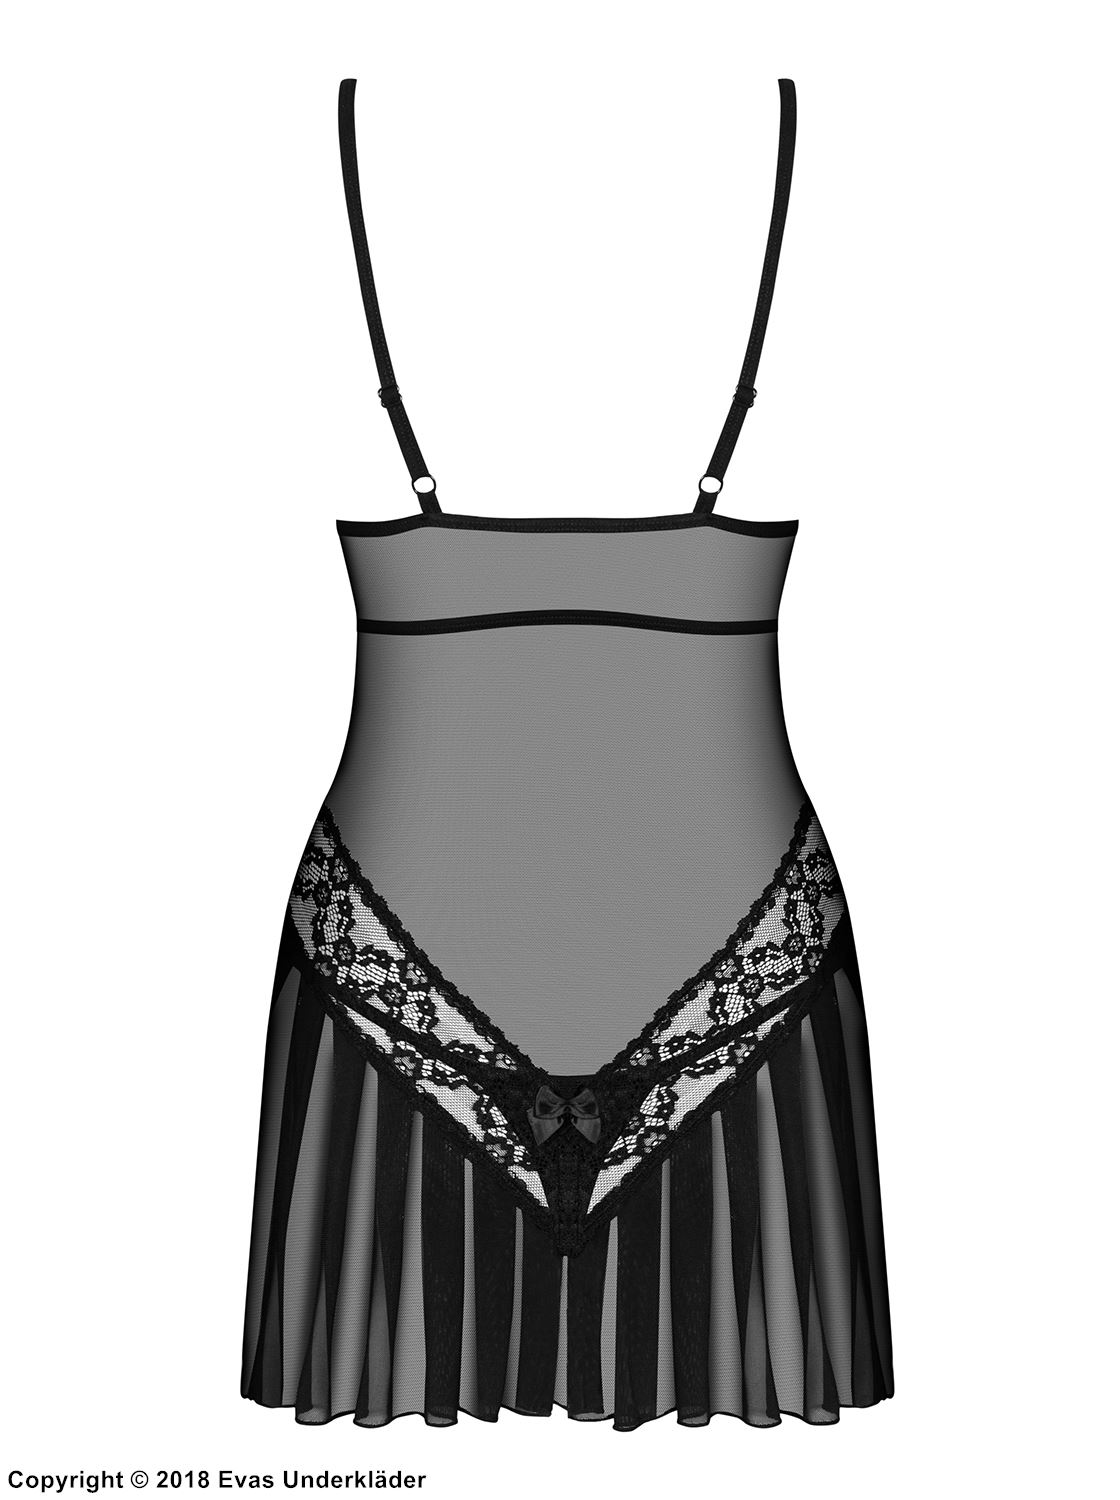 Skin-tight chemise, sheer mesh, lace inlays, pleats